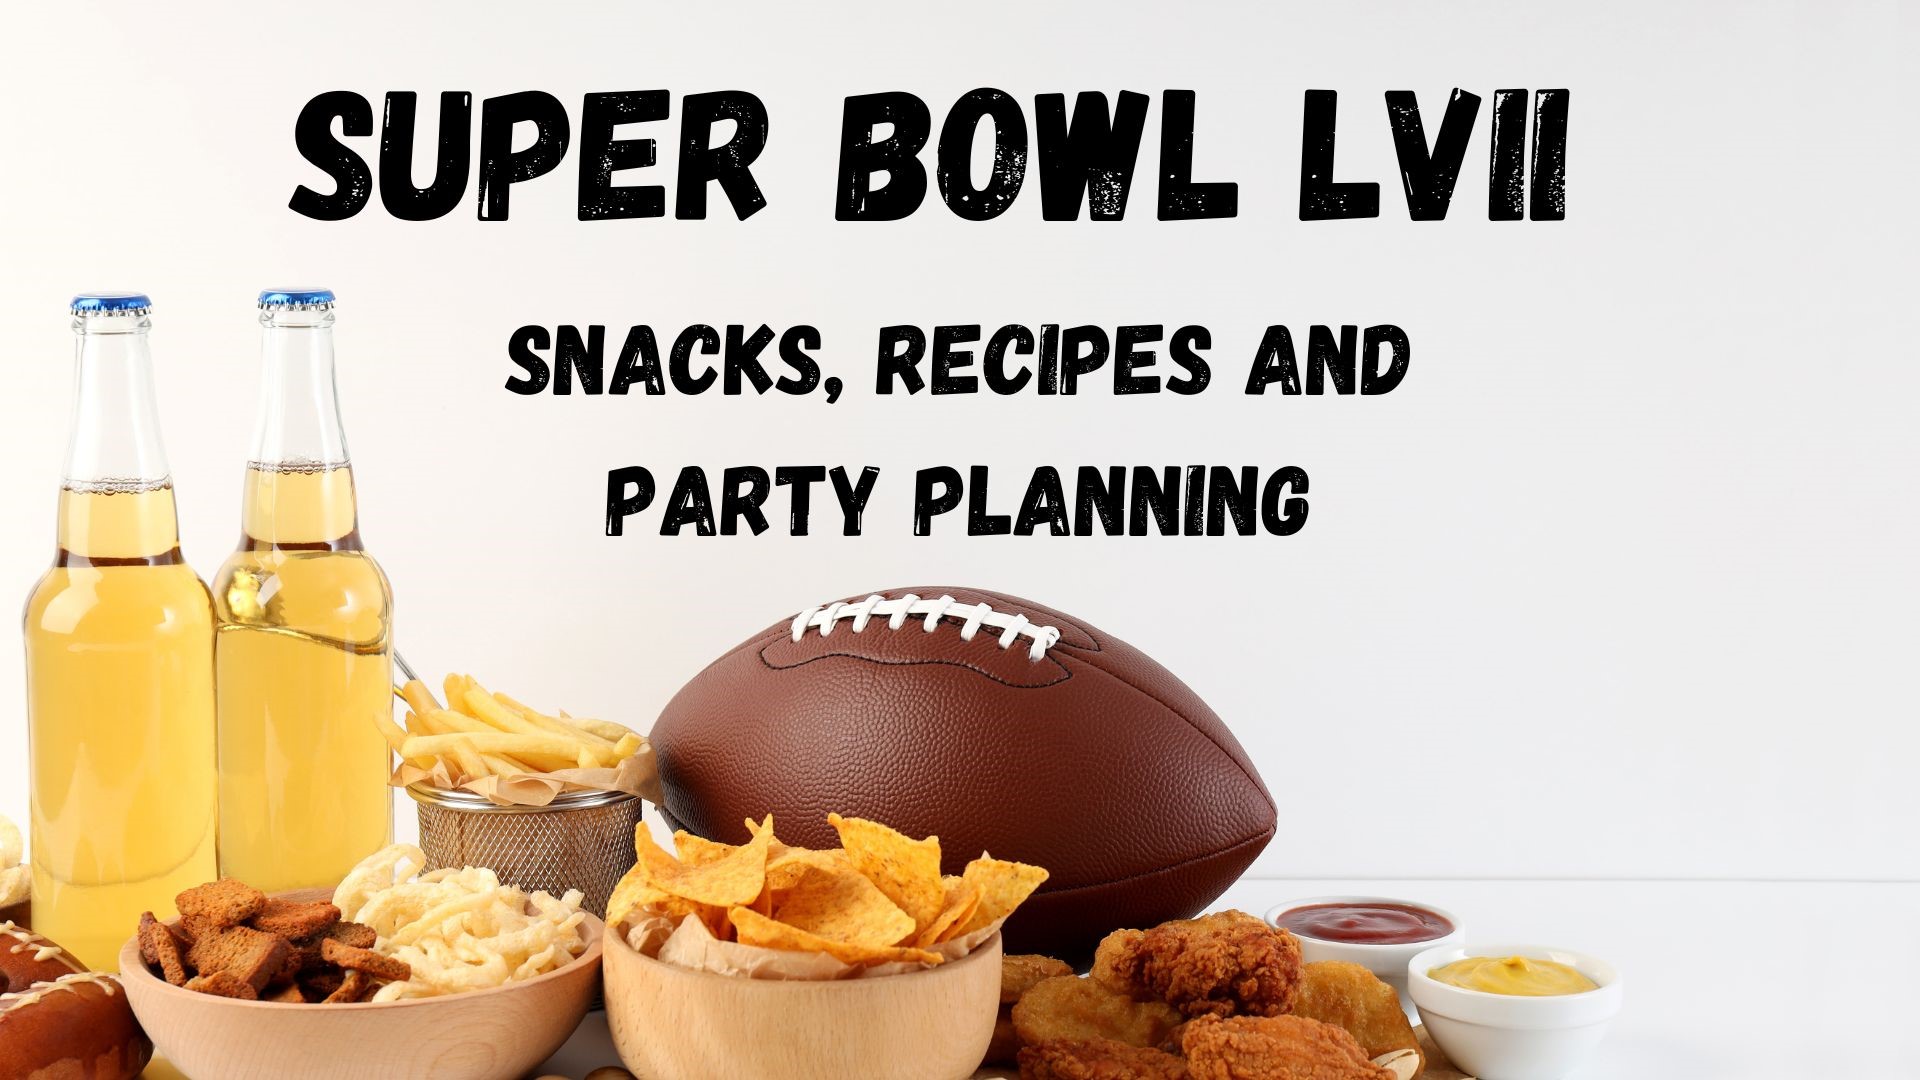 How you can save money while shopping for your Super Bowl spread, plus decoration and recipe ideas.